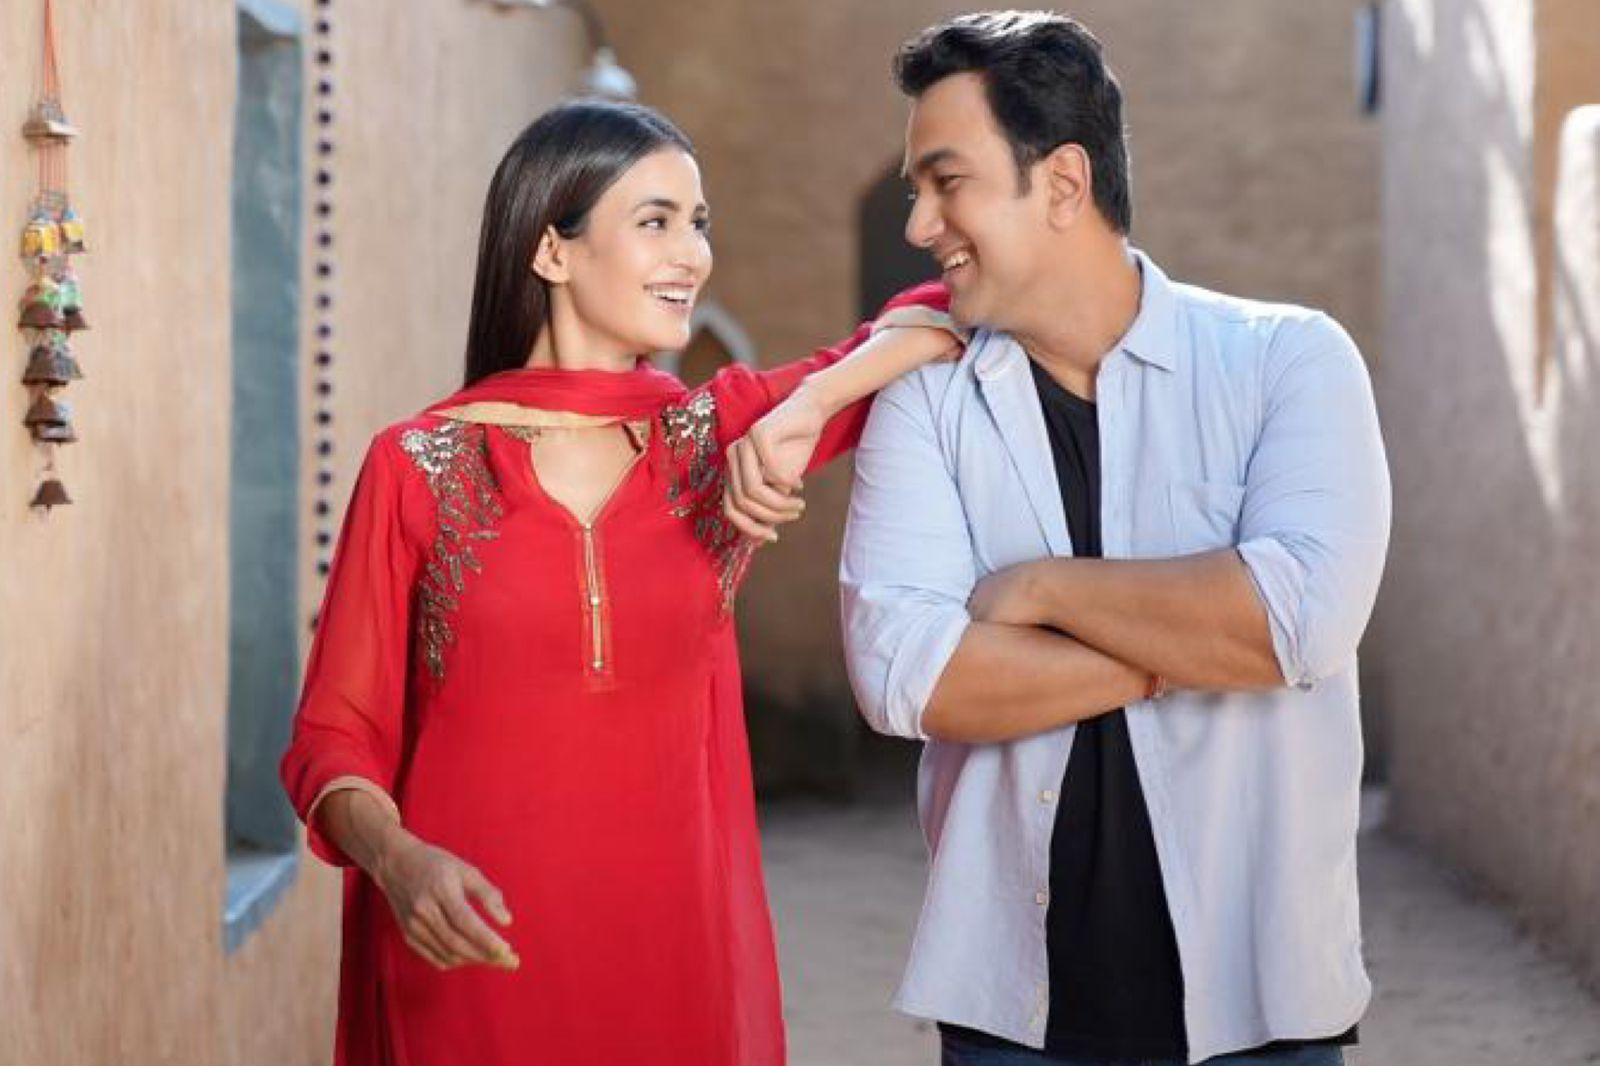 ‘Tu Hi Mera Rab’ song by Rajat Bakshi and Insta influencer Khushi Chaudhry released, must watch this beautiful love story